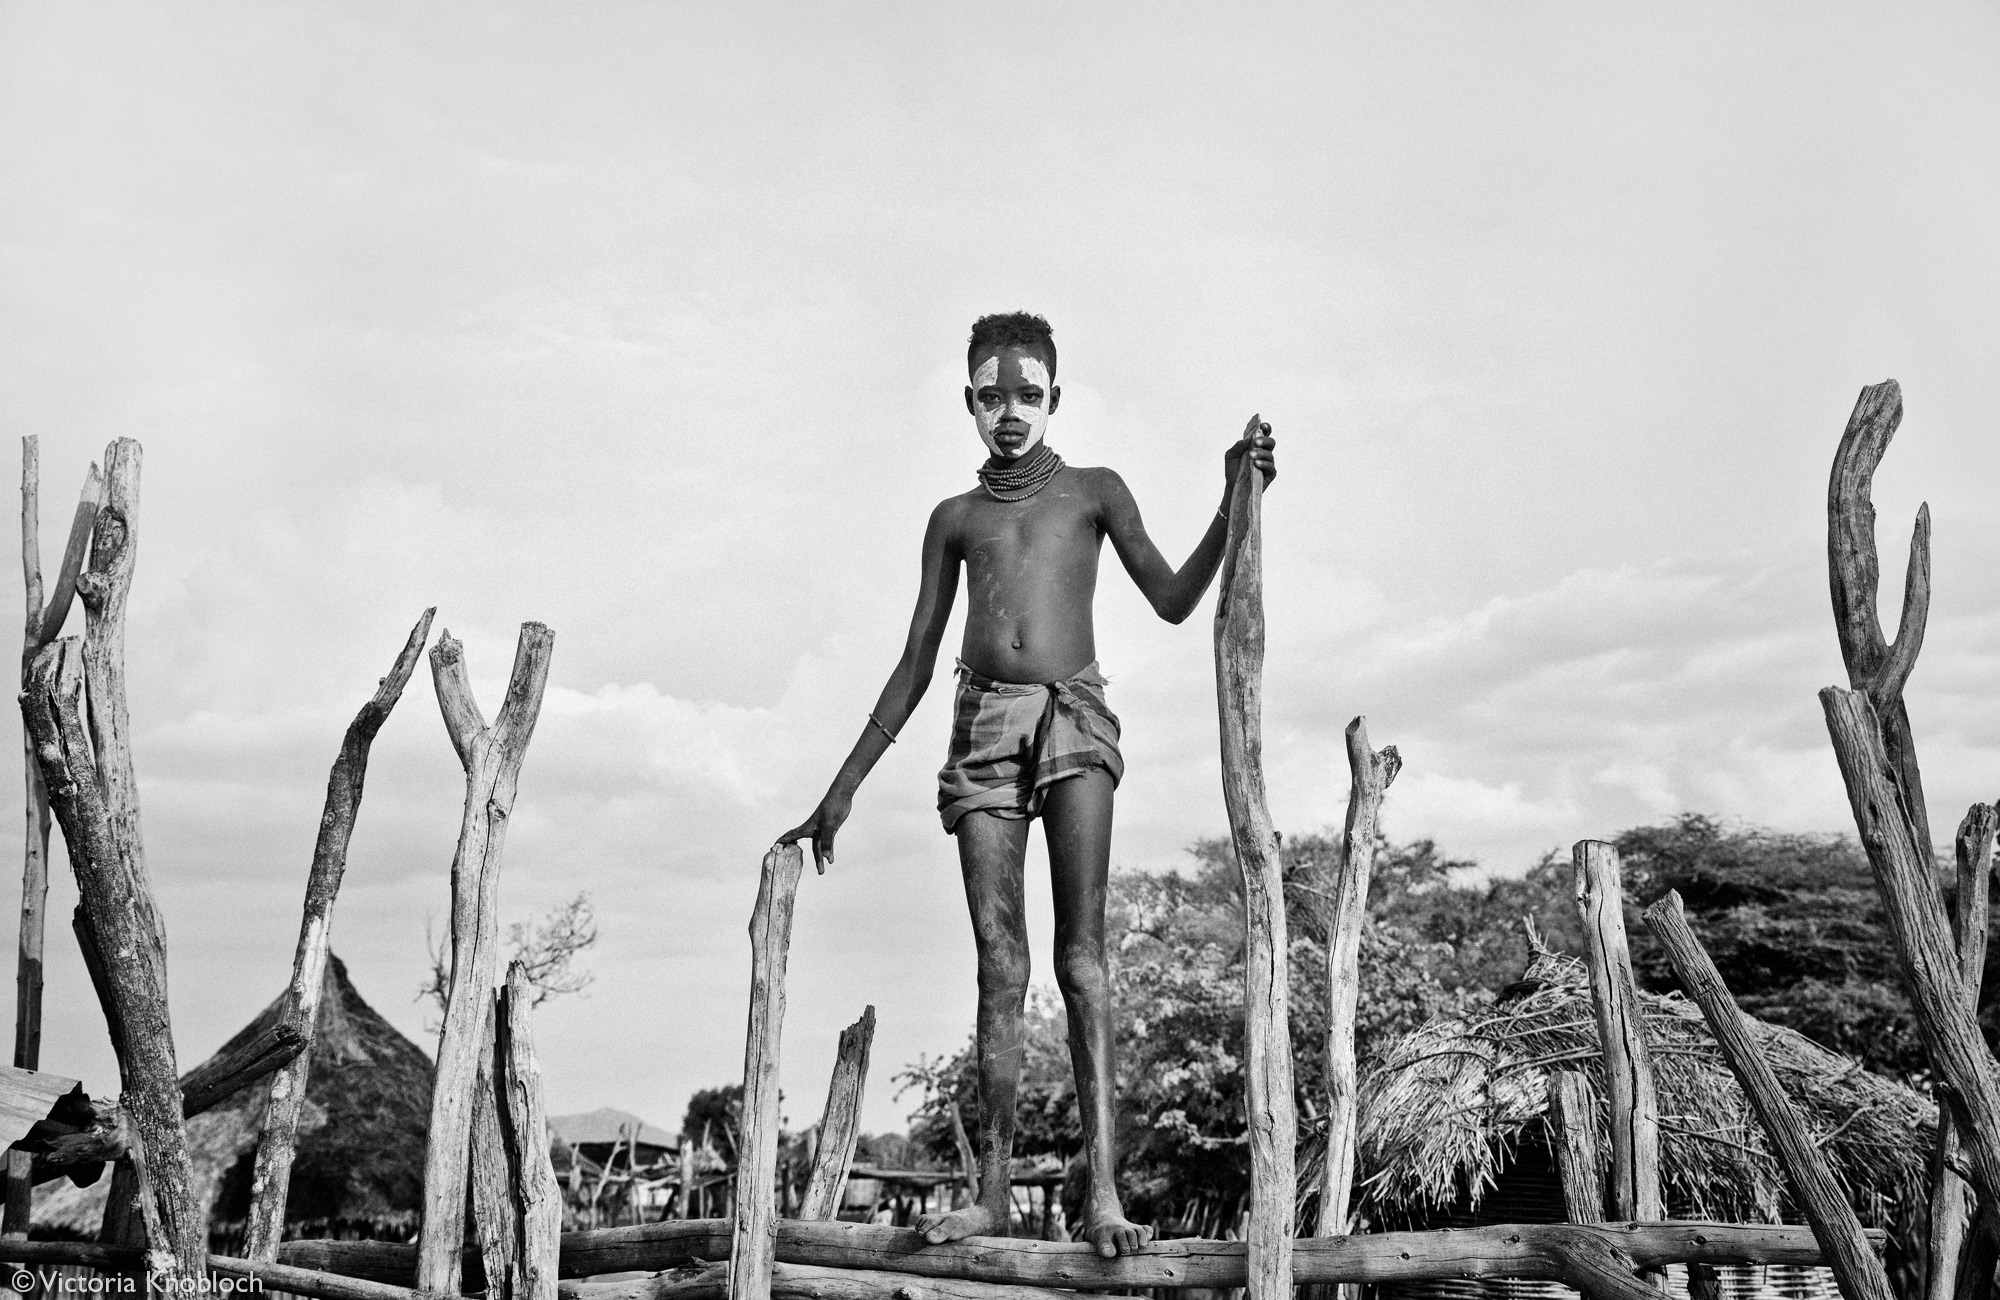 Karo tribe boy standing on top of wooden fence, Omo Valley, Ethiopia